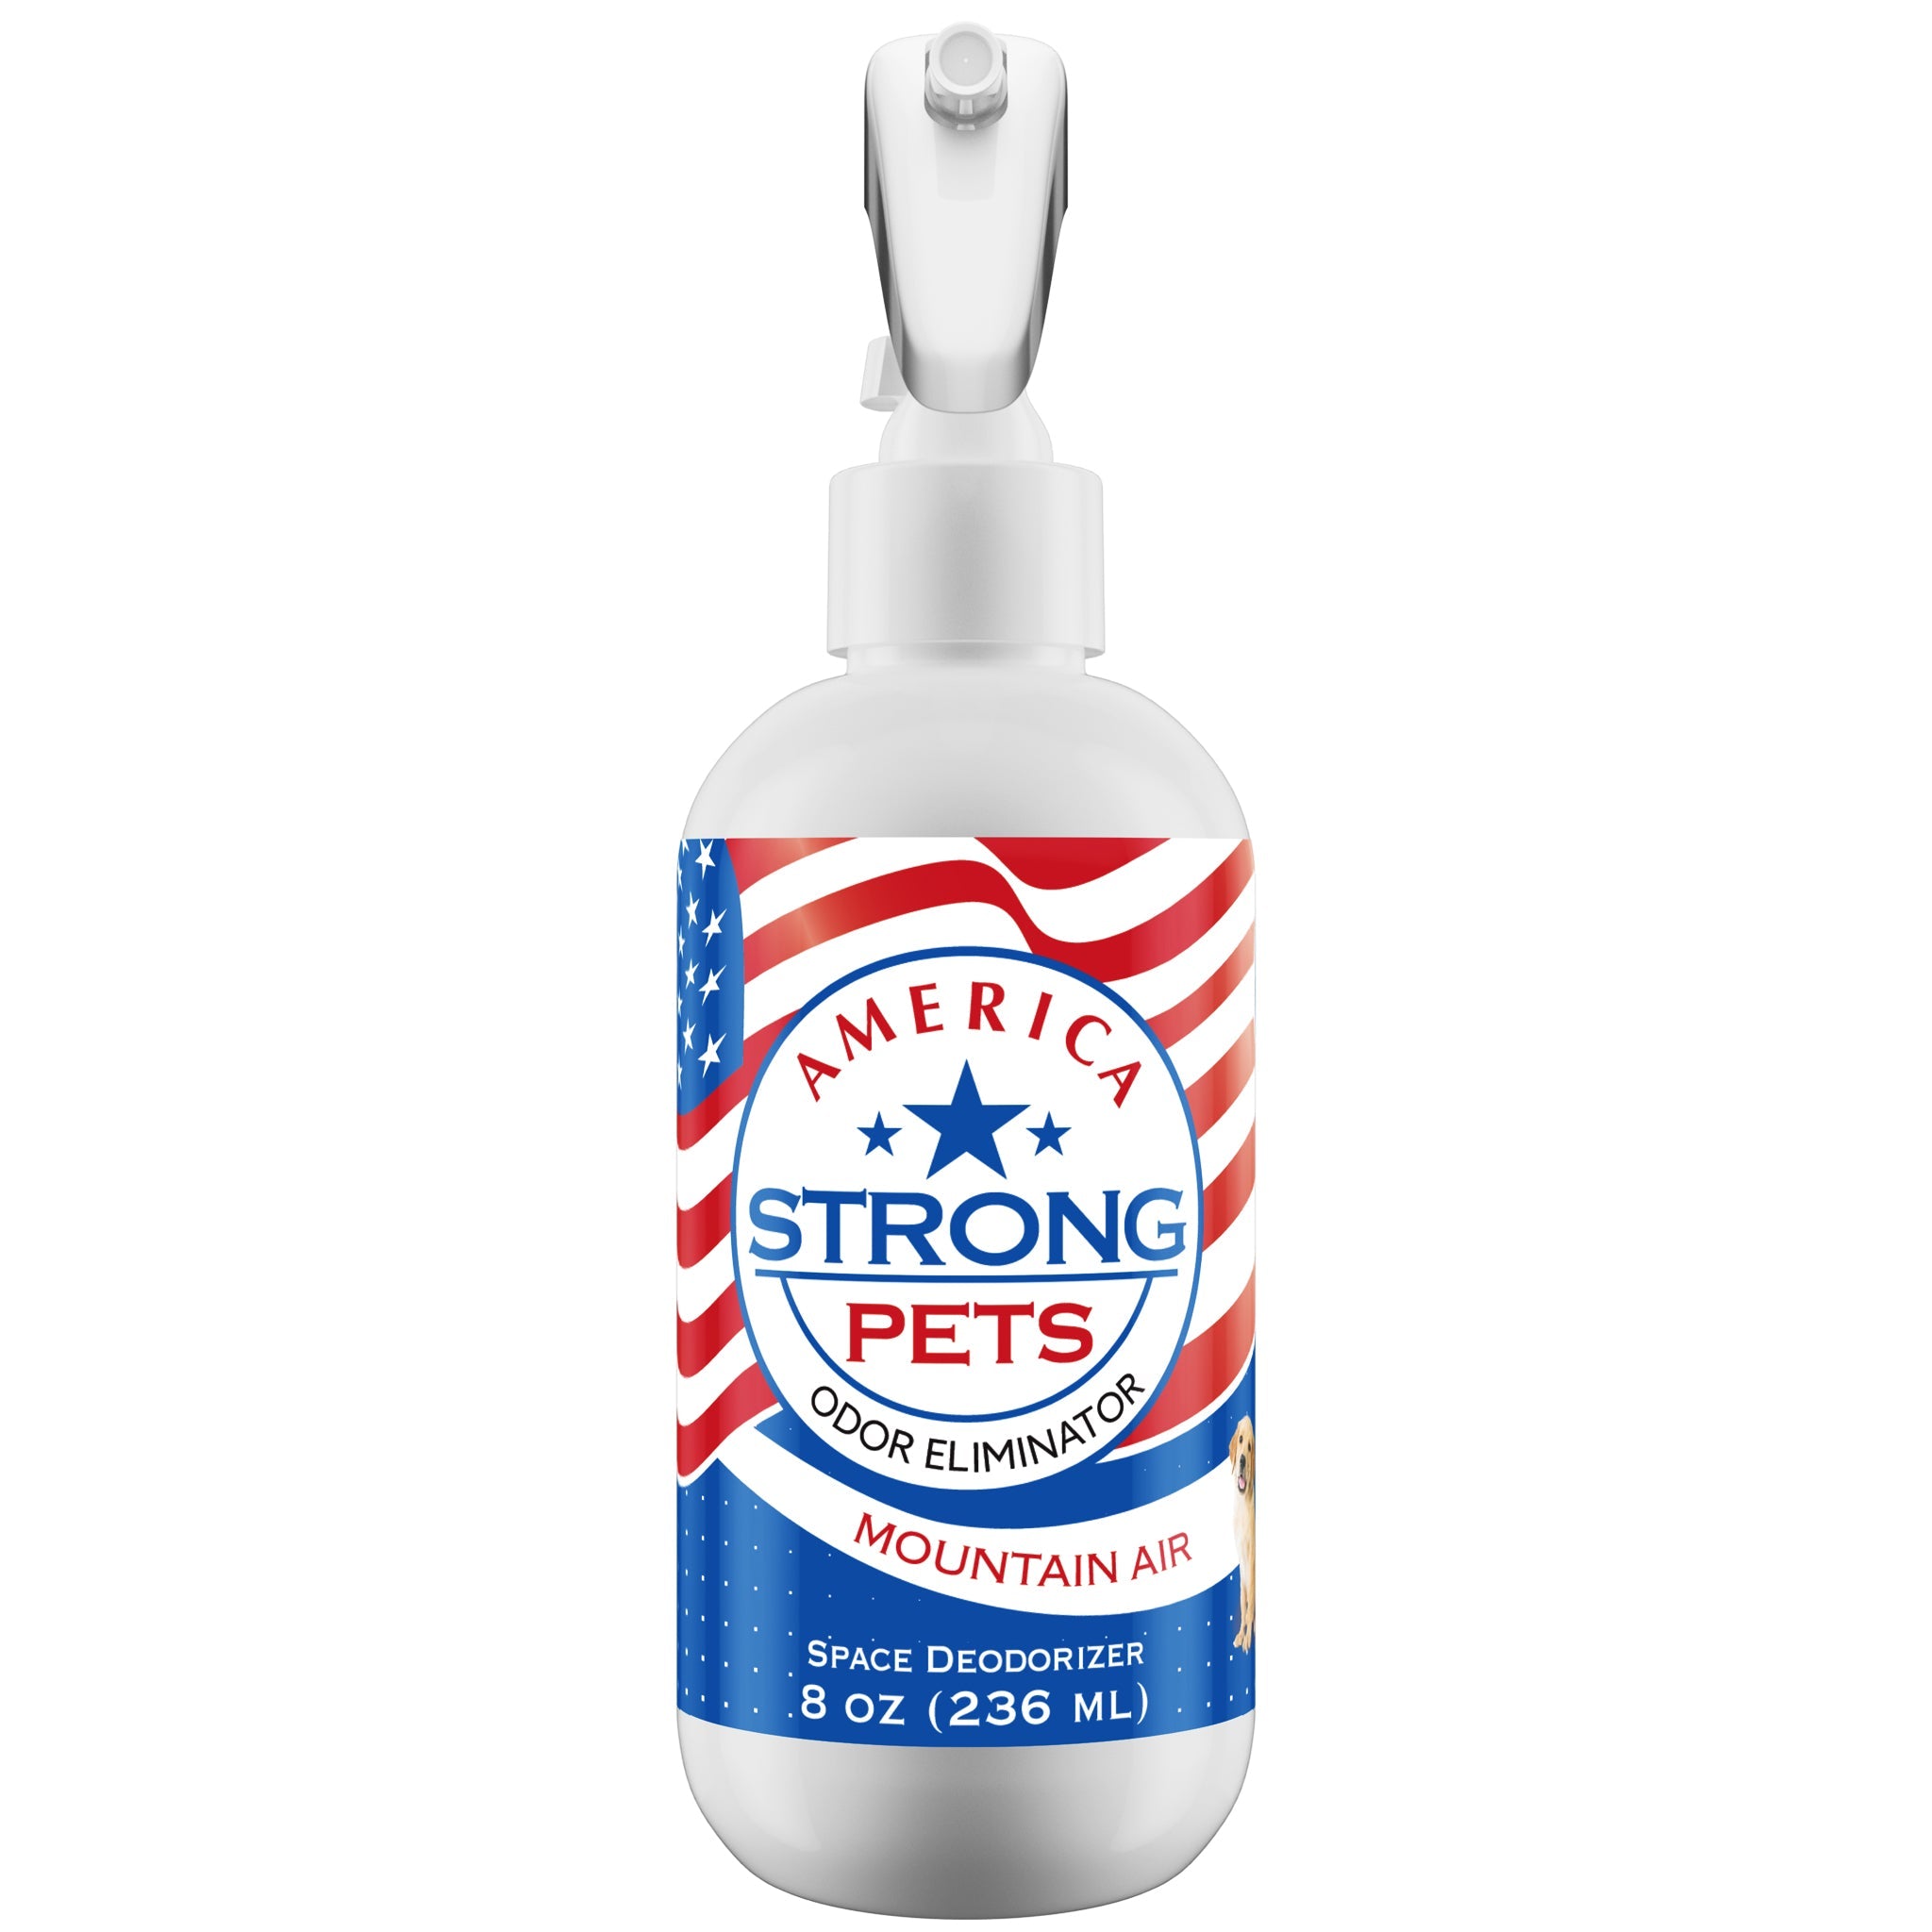 America Strong Pet Odor Eliminator - Mountain Air Scent Size: 8 fl oz